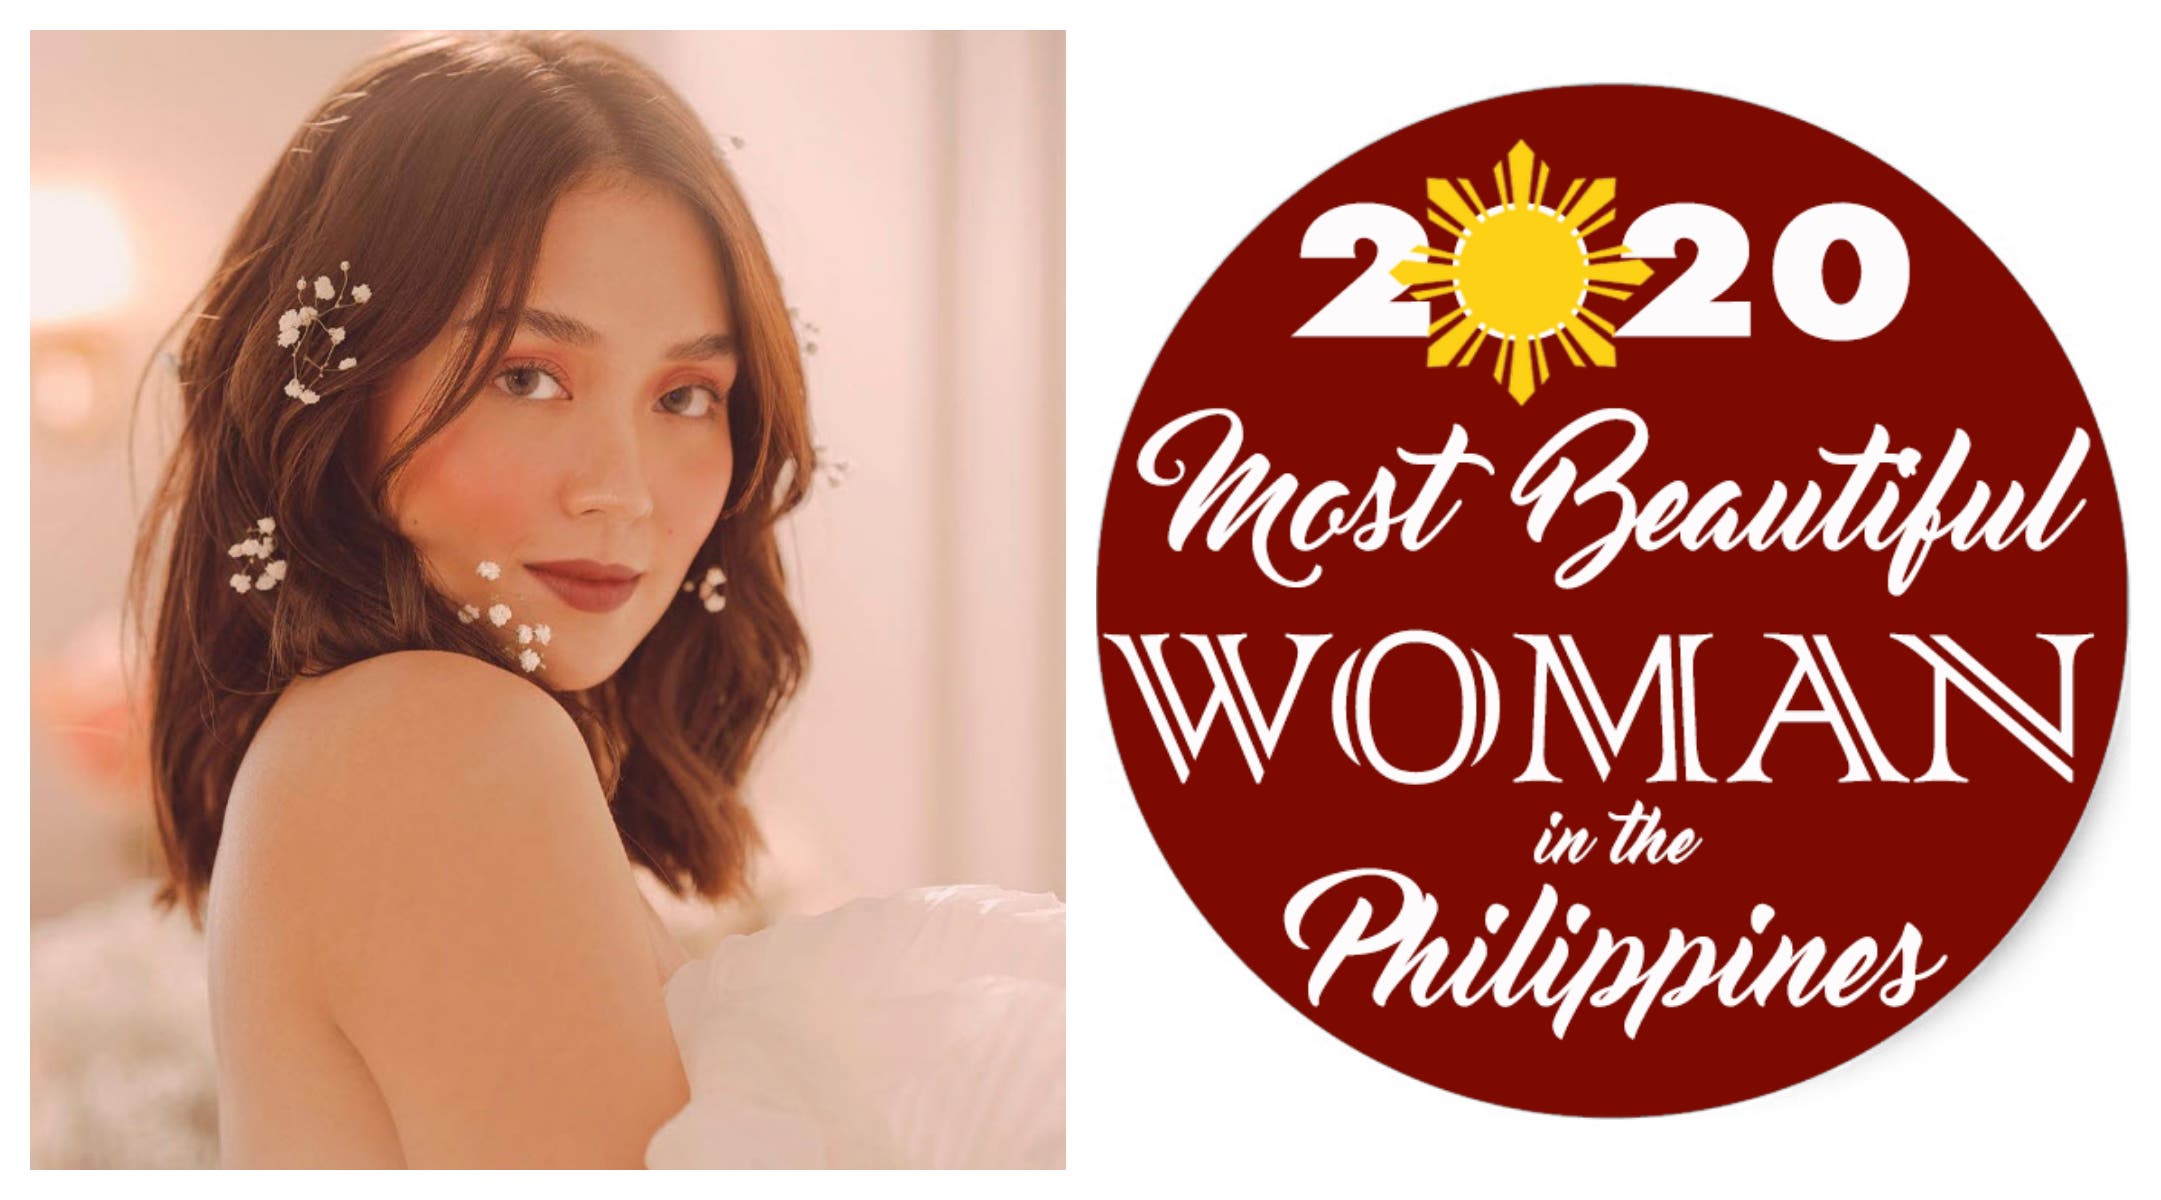 Nominations for ‘Most Beautiful Woman in the Philippines 2020’ Now Open